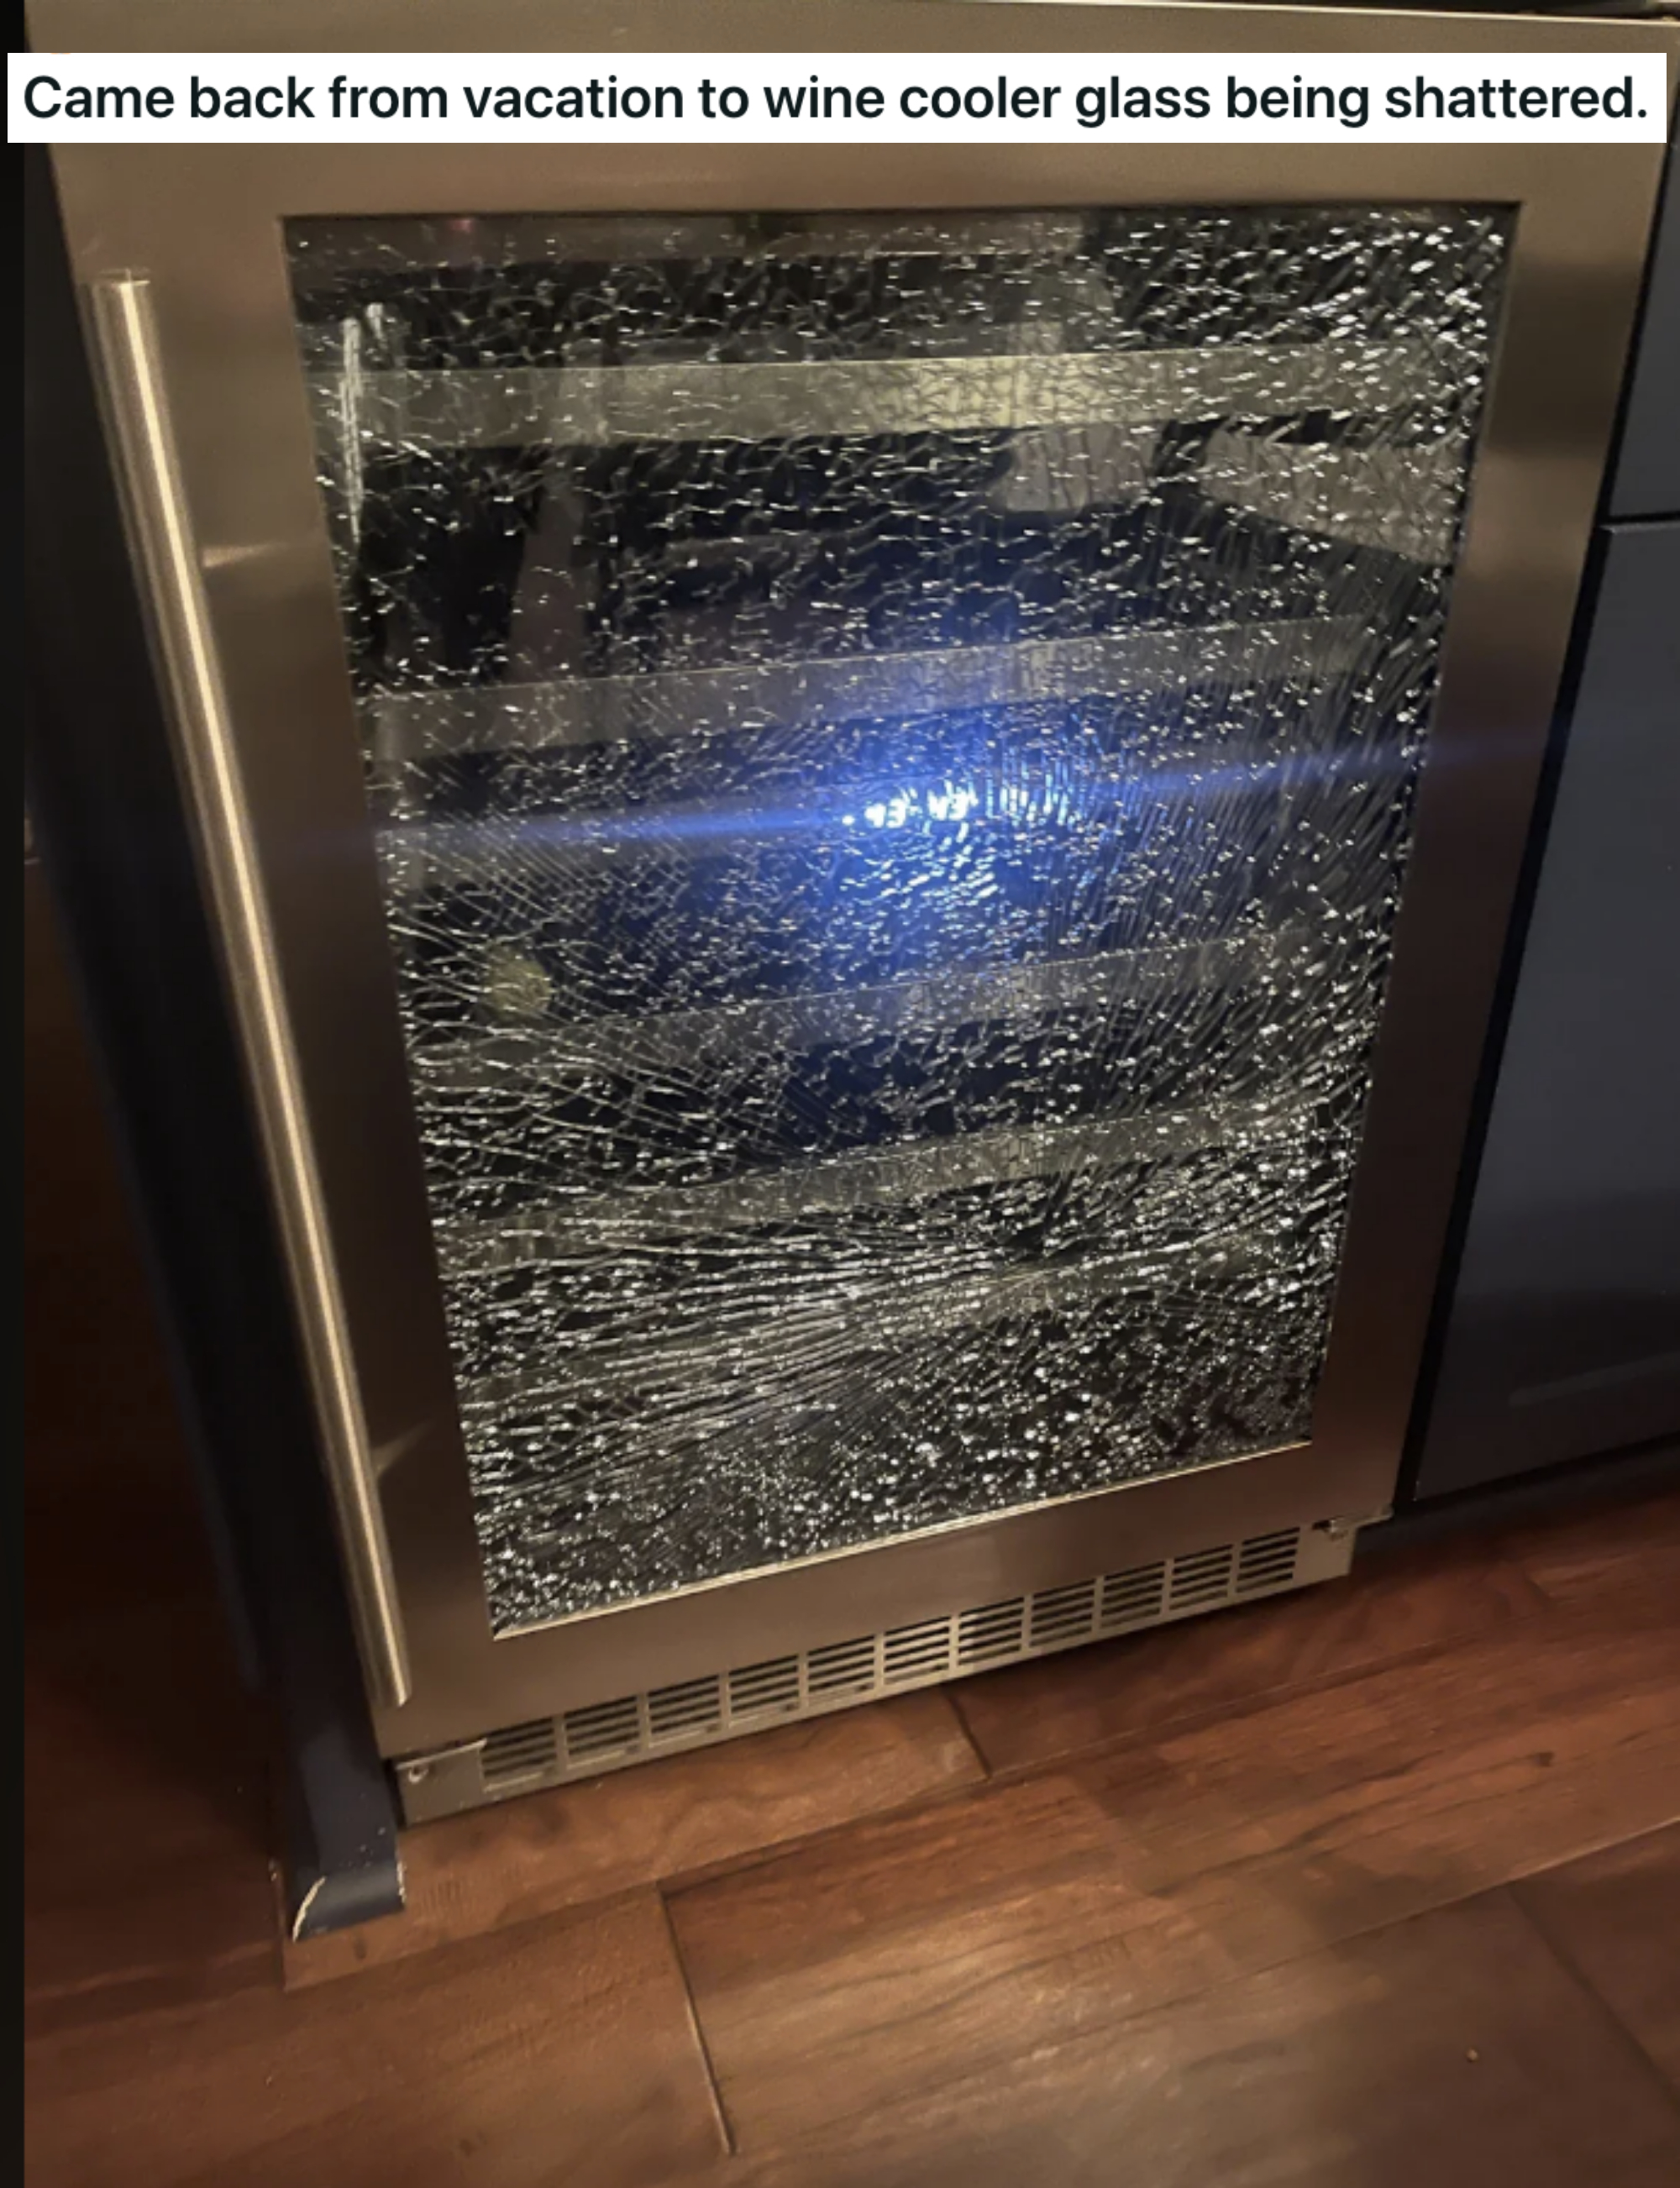 &quot;Came back from vacation to wine cooler glass being shattered&quot;